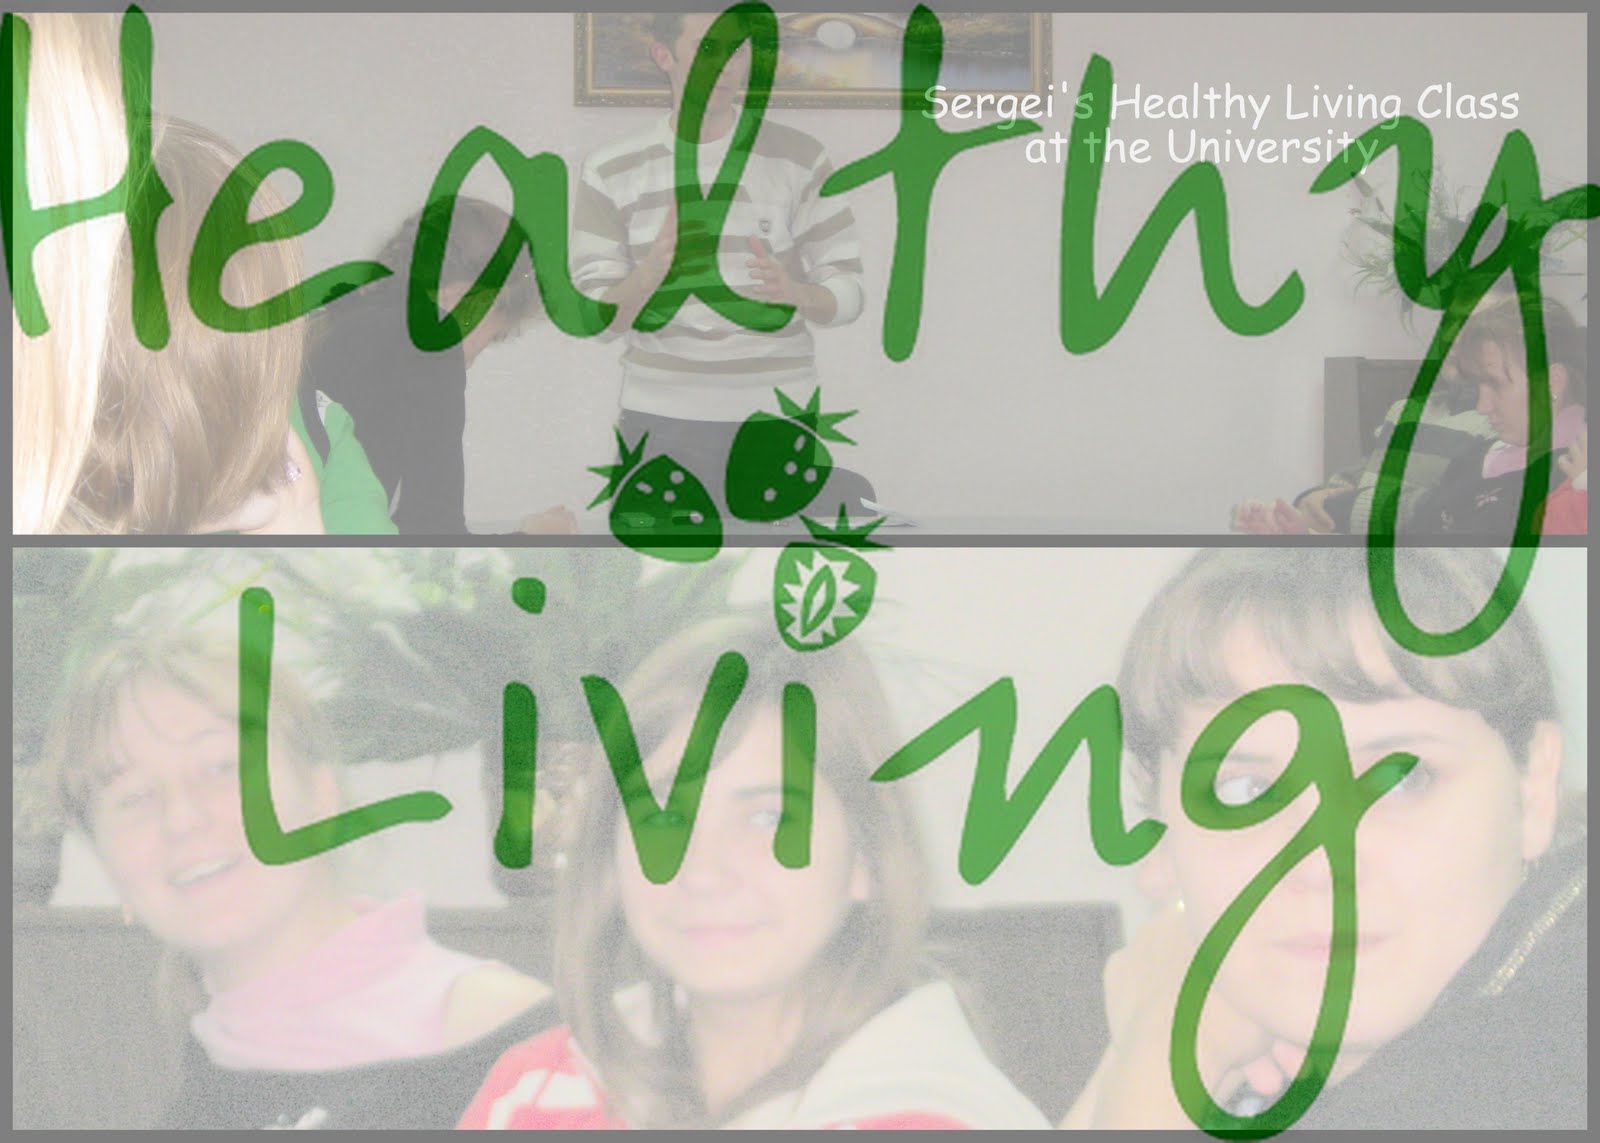 Healthy+living+pyramid+poster